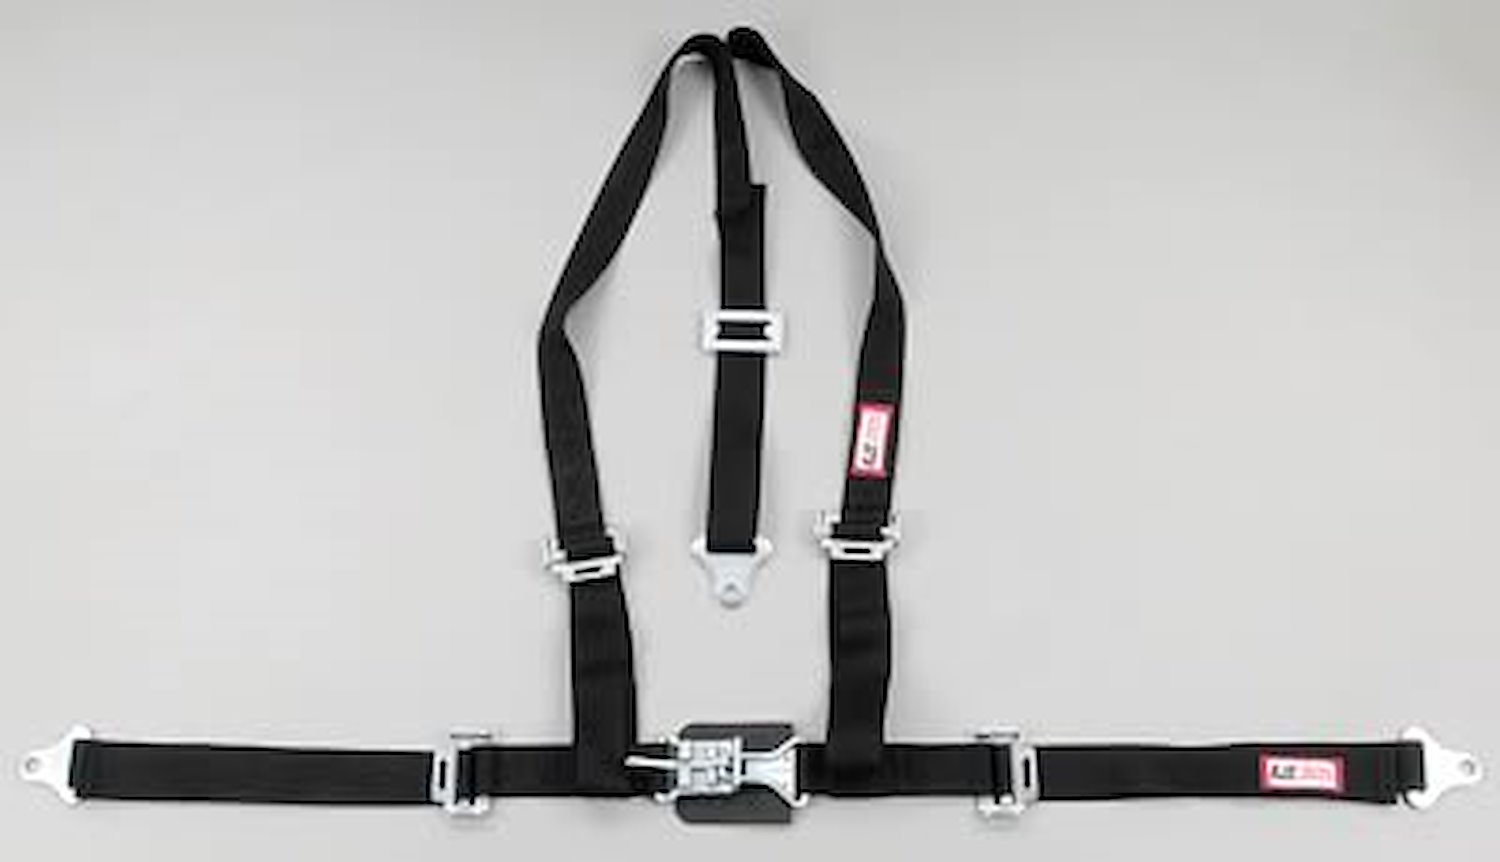 NON-SFI L&L HARNESS 3 PULL DOWN Lap Belt SEWN IN 2 Shoulder Harness V ROLL BAR Mount ALL SNAP ENDS GRAY